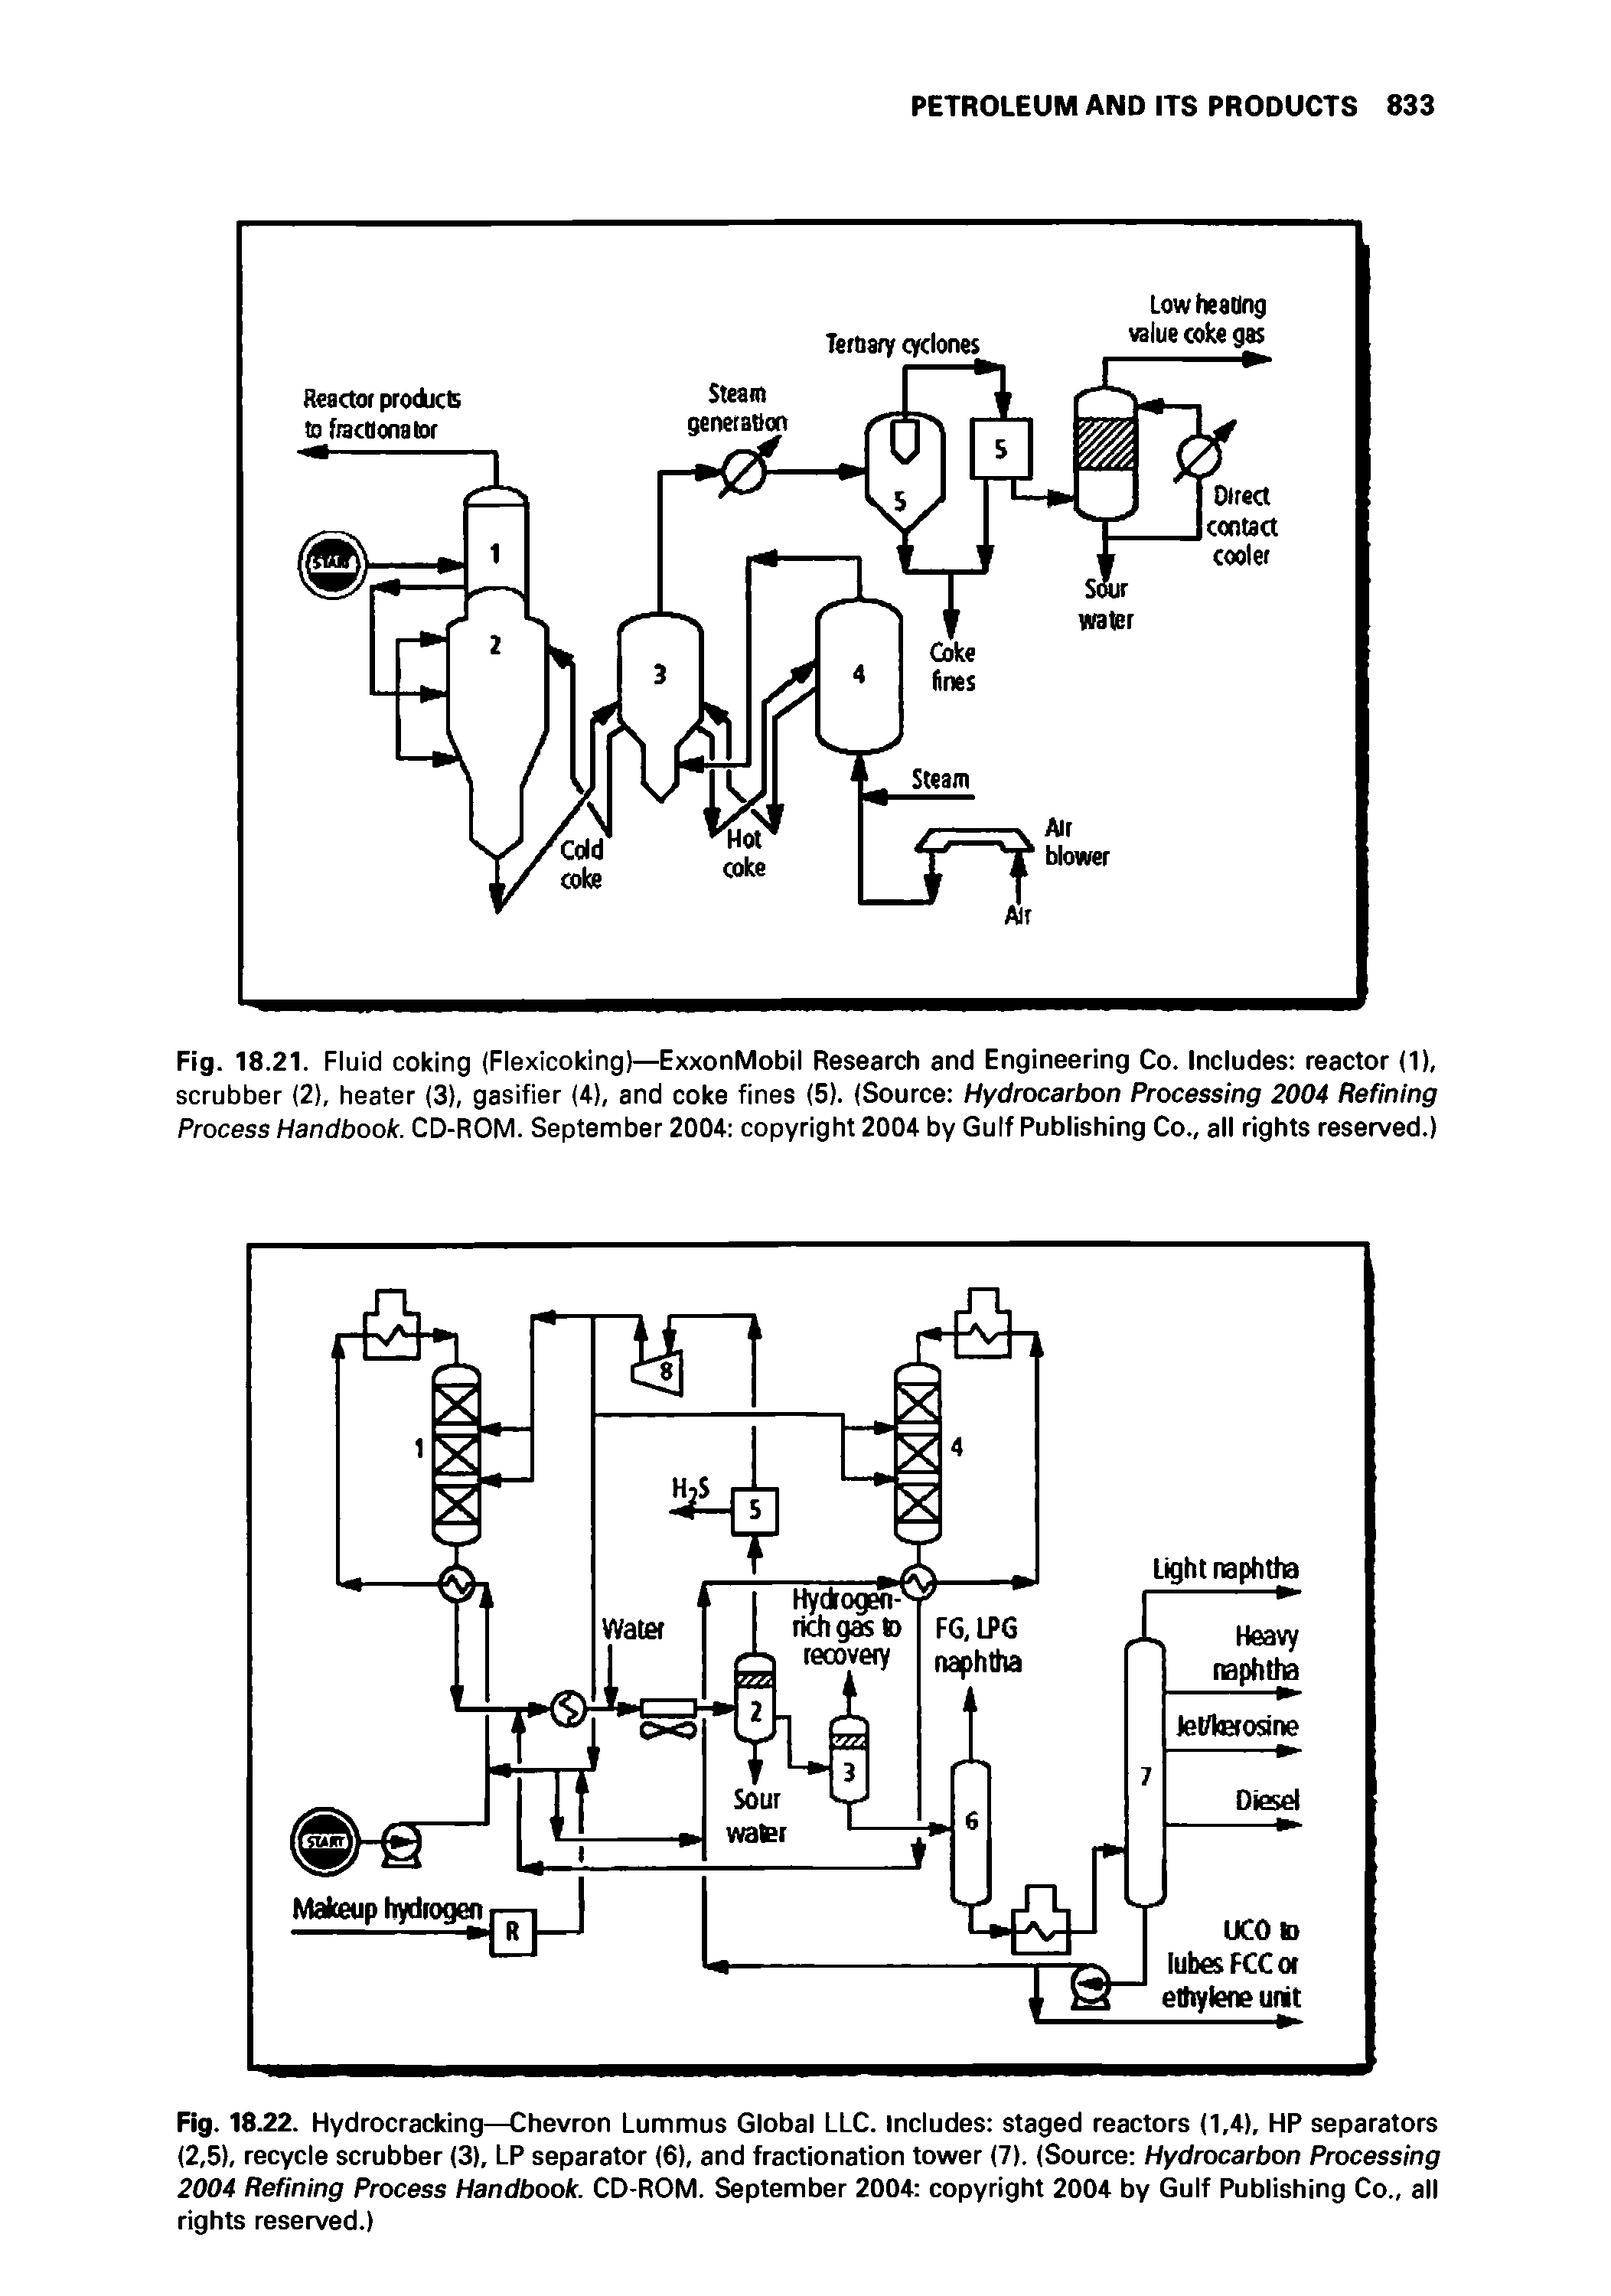 Fig. 18.22. Hydrocracking—Chevron Lummus Global LLC. Includes staged reactors (1,4), HP separators (2,5), recycle scrubber (3), LP separator (6), and fractionation tower (7). (Source Hydrocarbon Processing 2004 Refining Process Handbook. CD-ROM. September 2004 copyright 2004 by Gulf Publishing Co., all rights reserved.)...